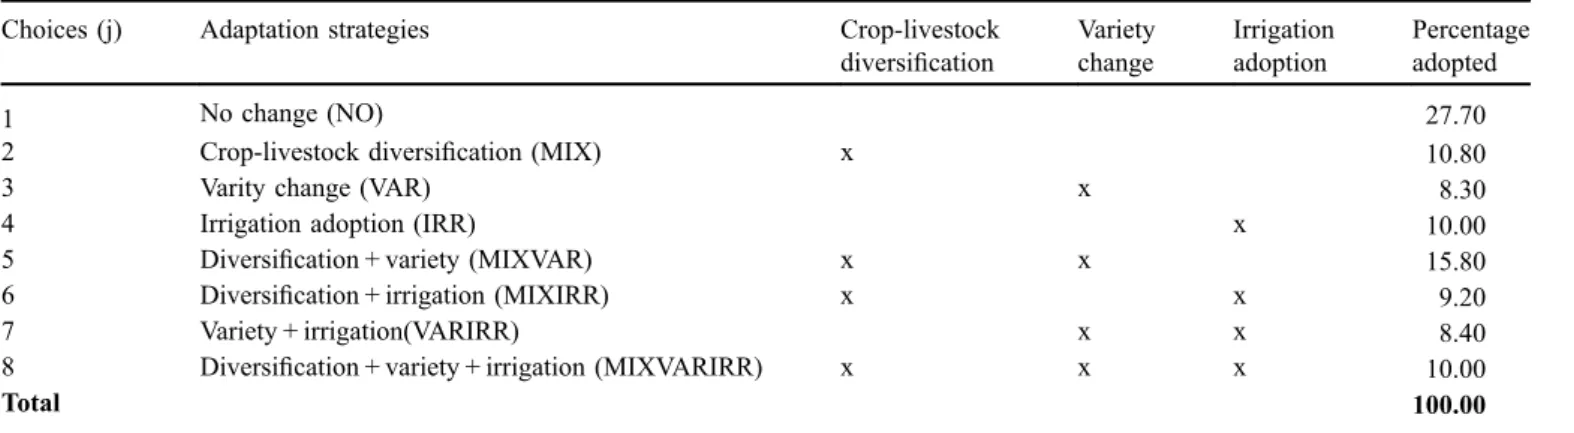 Table 1. Percentage distribution of sample farmers across the selected choices.